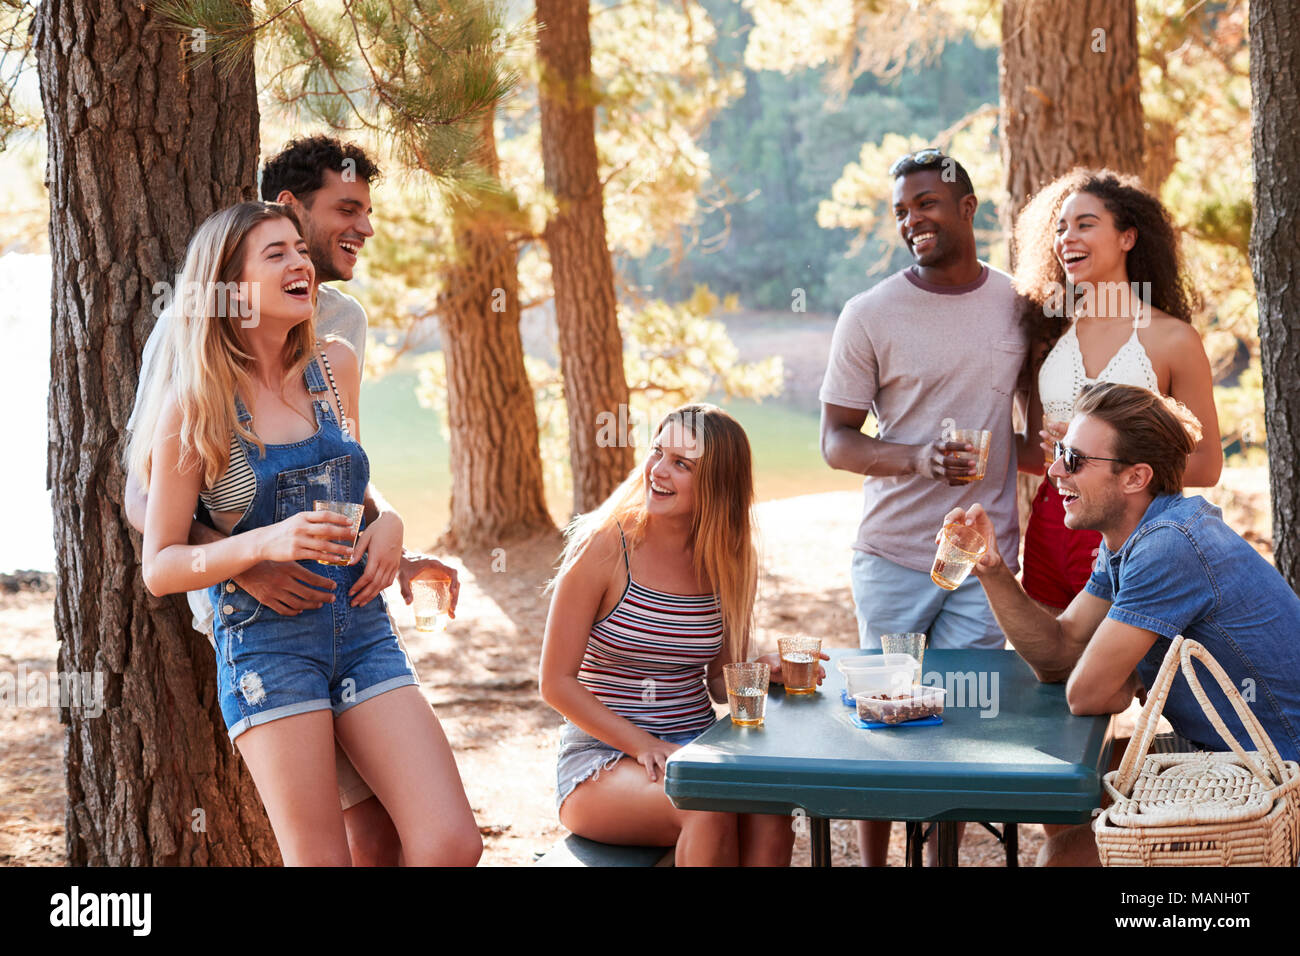 Group of adult friends hanging out by a lake, close up Stock Photo